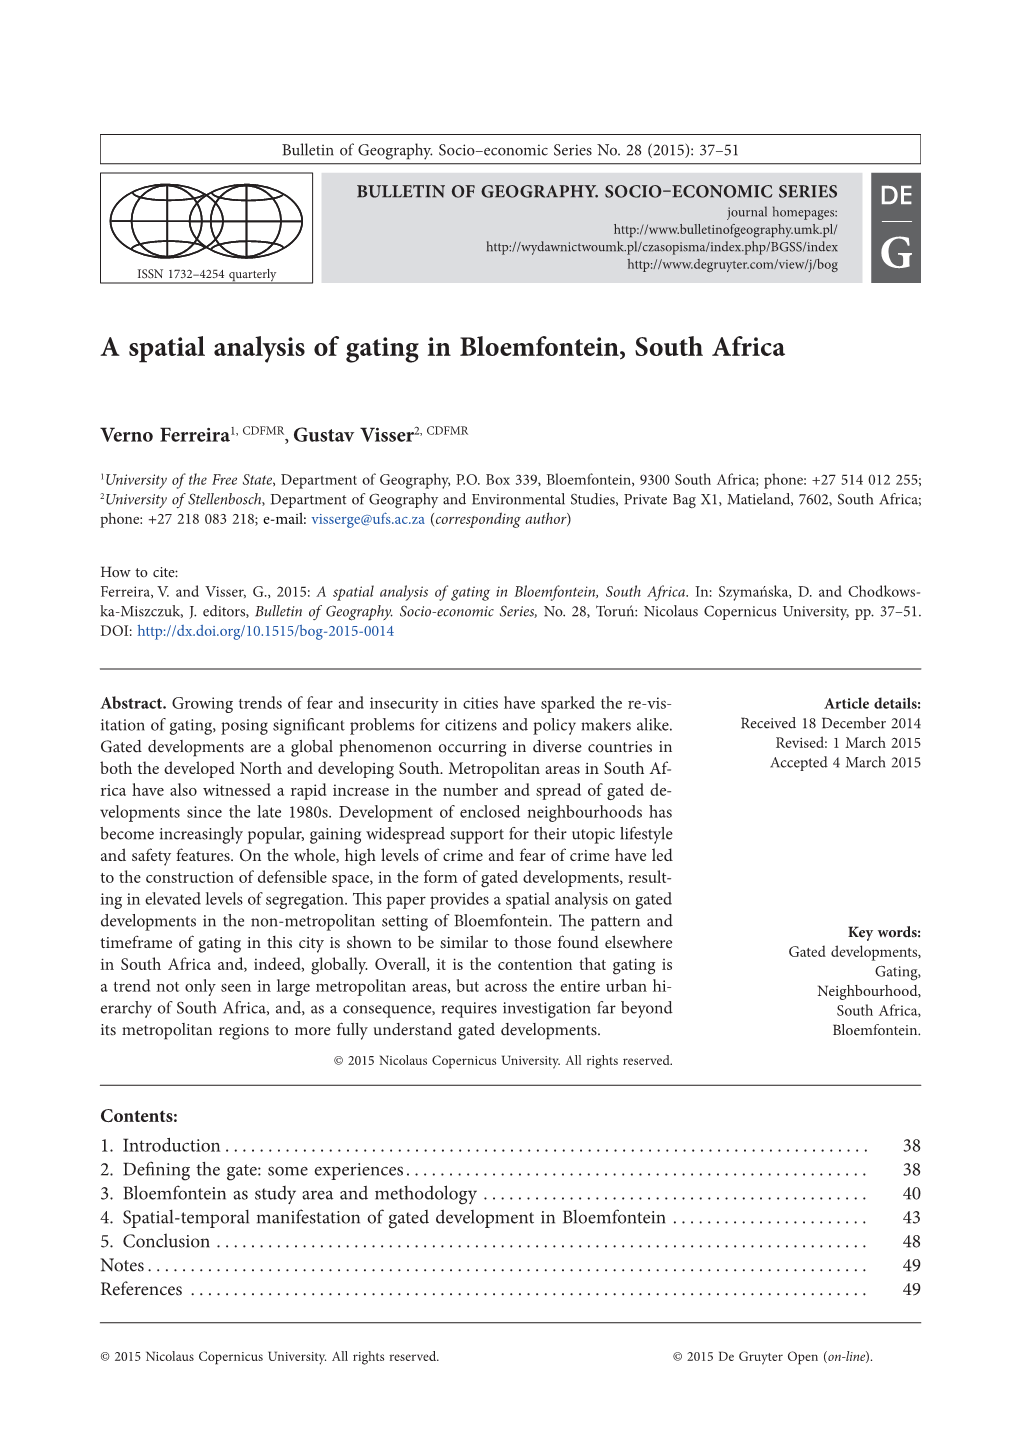 A Spatial Analysis of Gating in Bloemfontein, South Africa